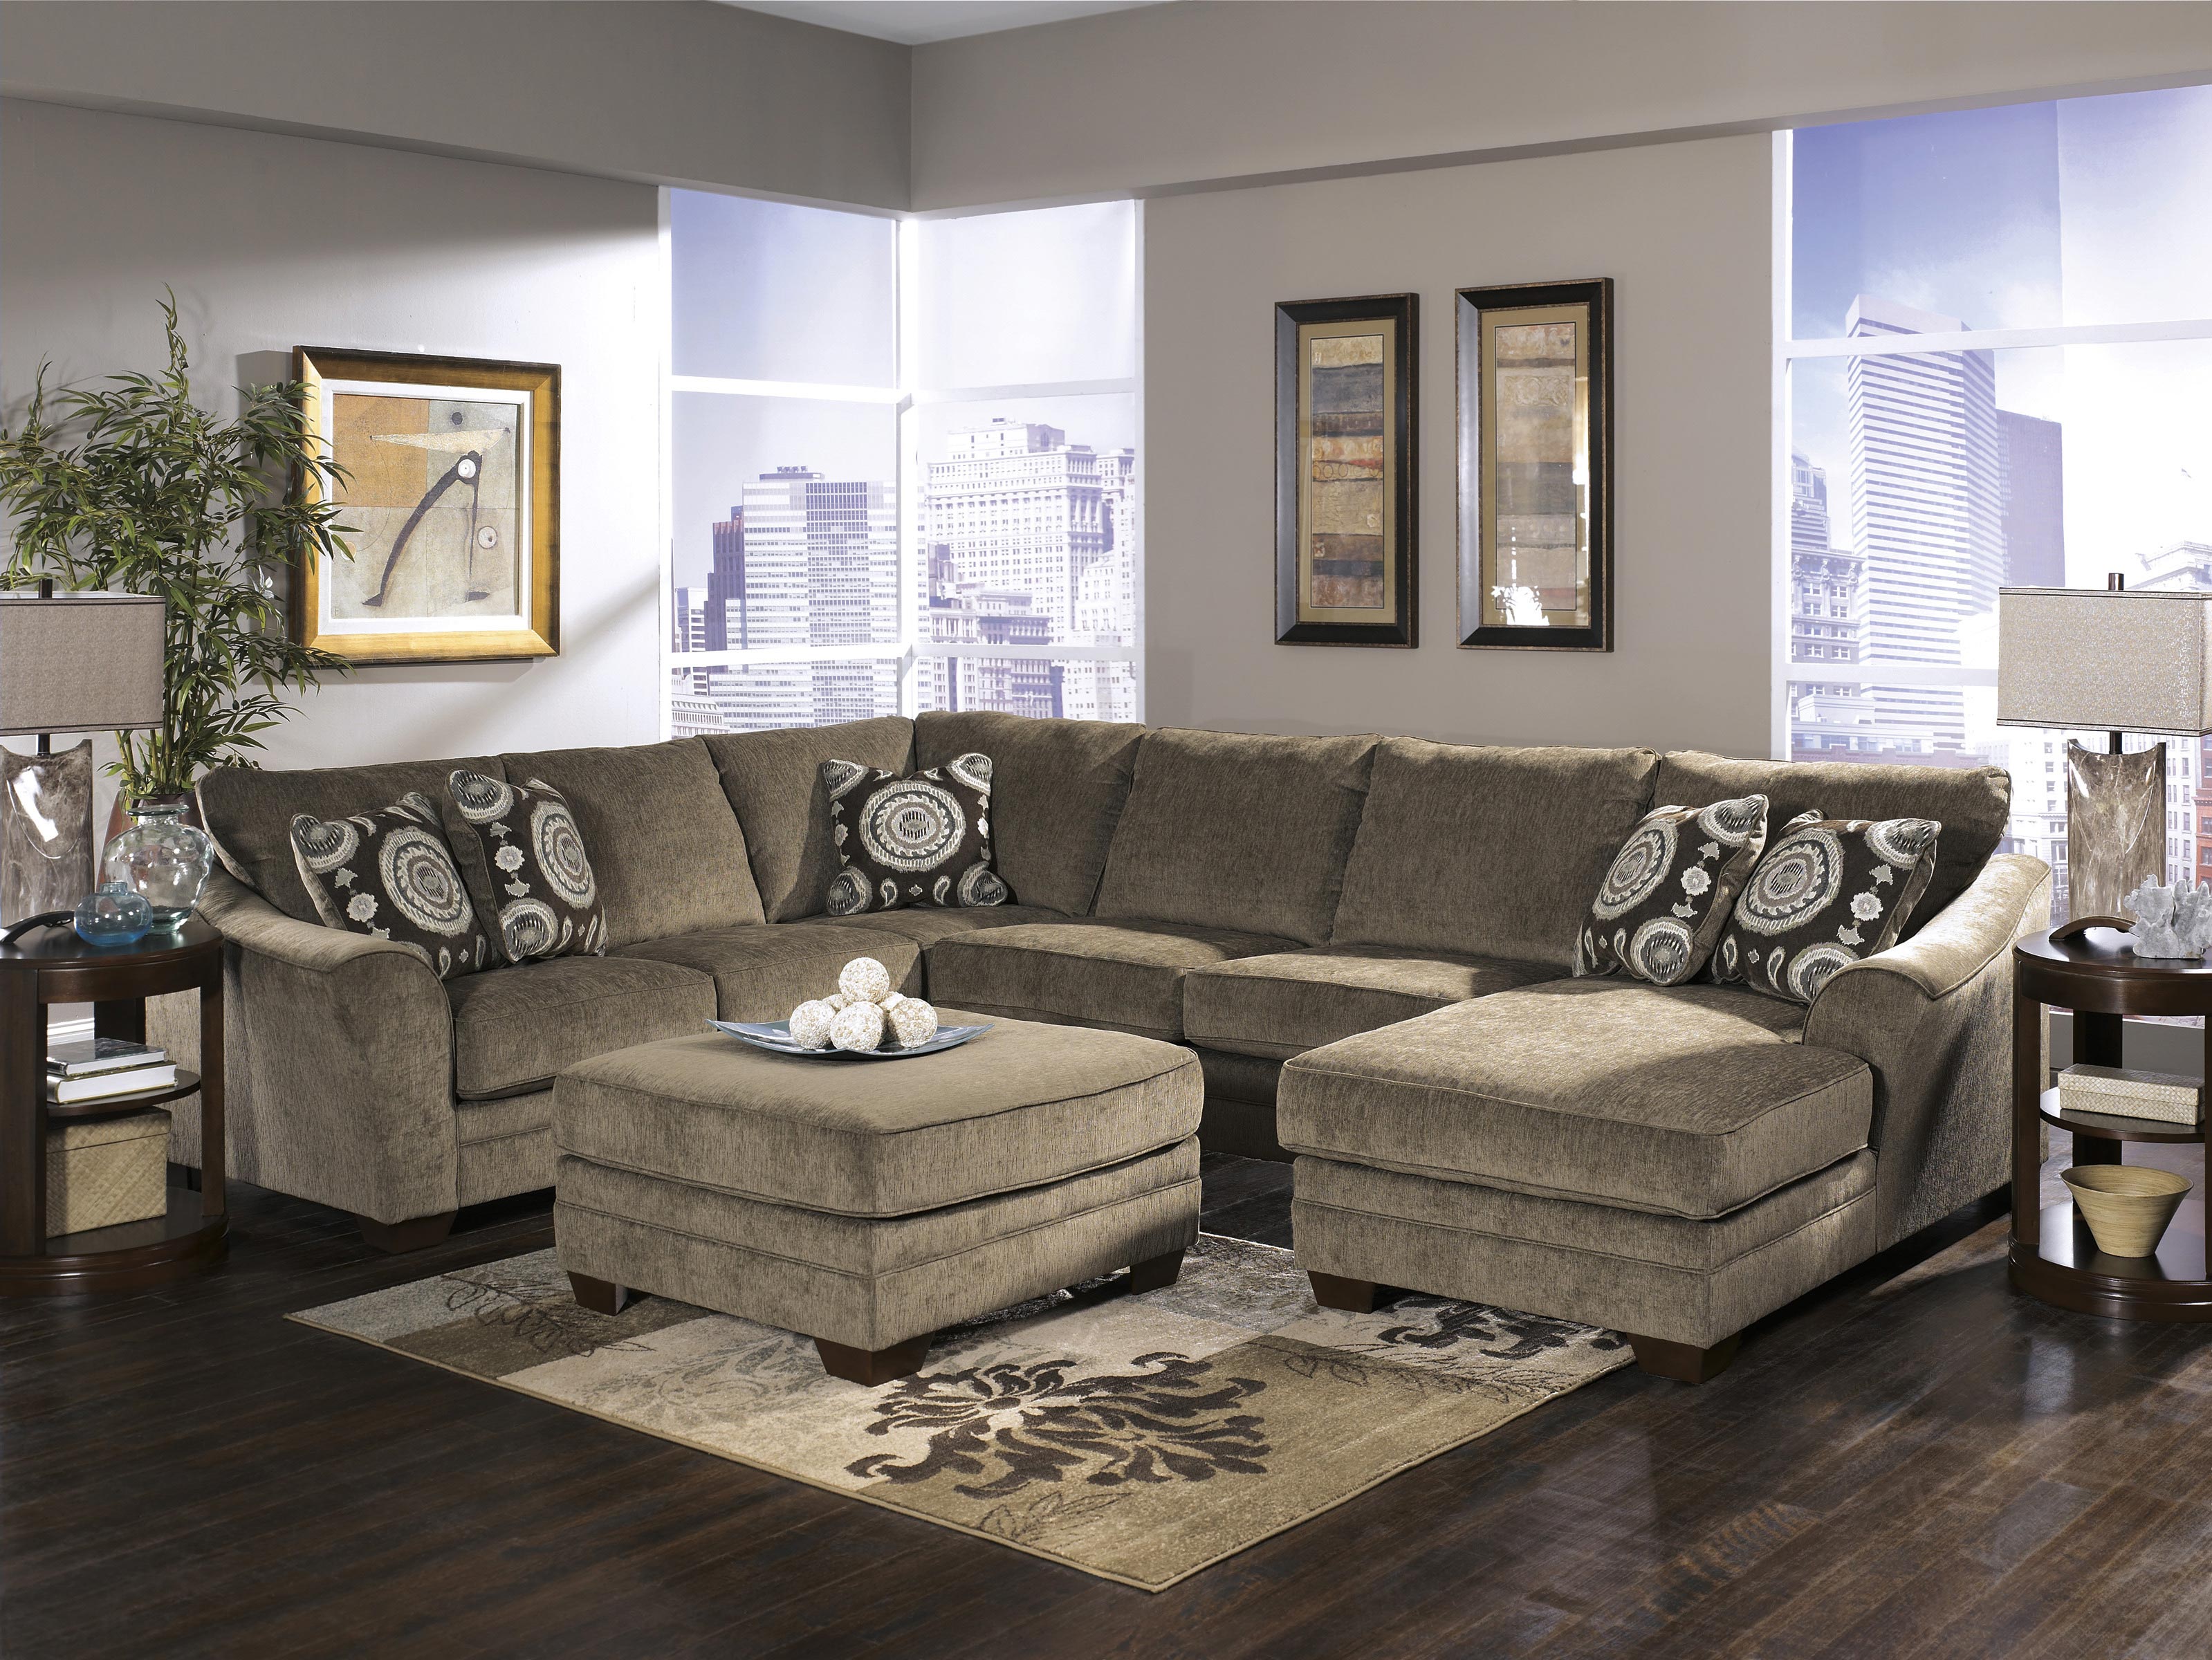 Decorating With A Sectional Sofa - Image to u